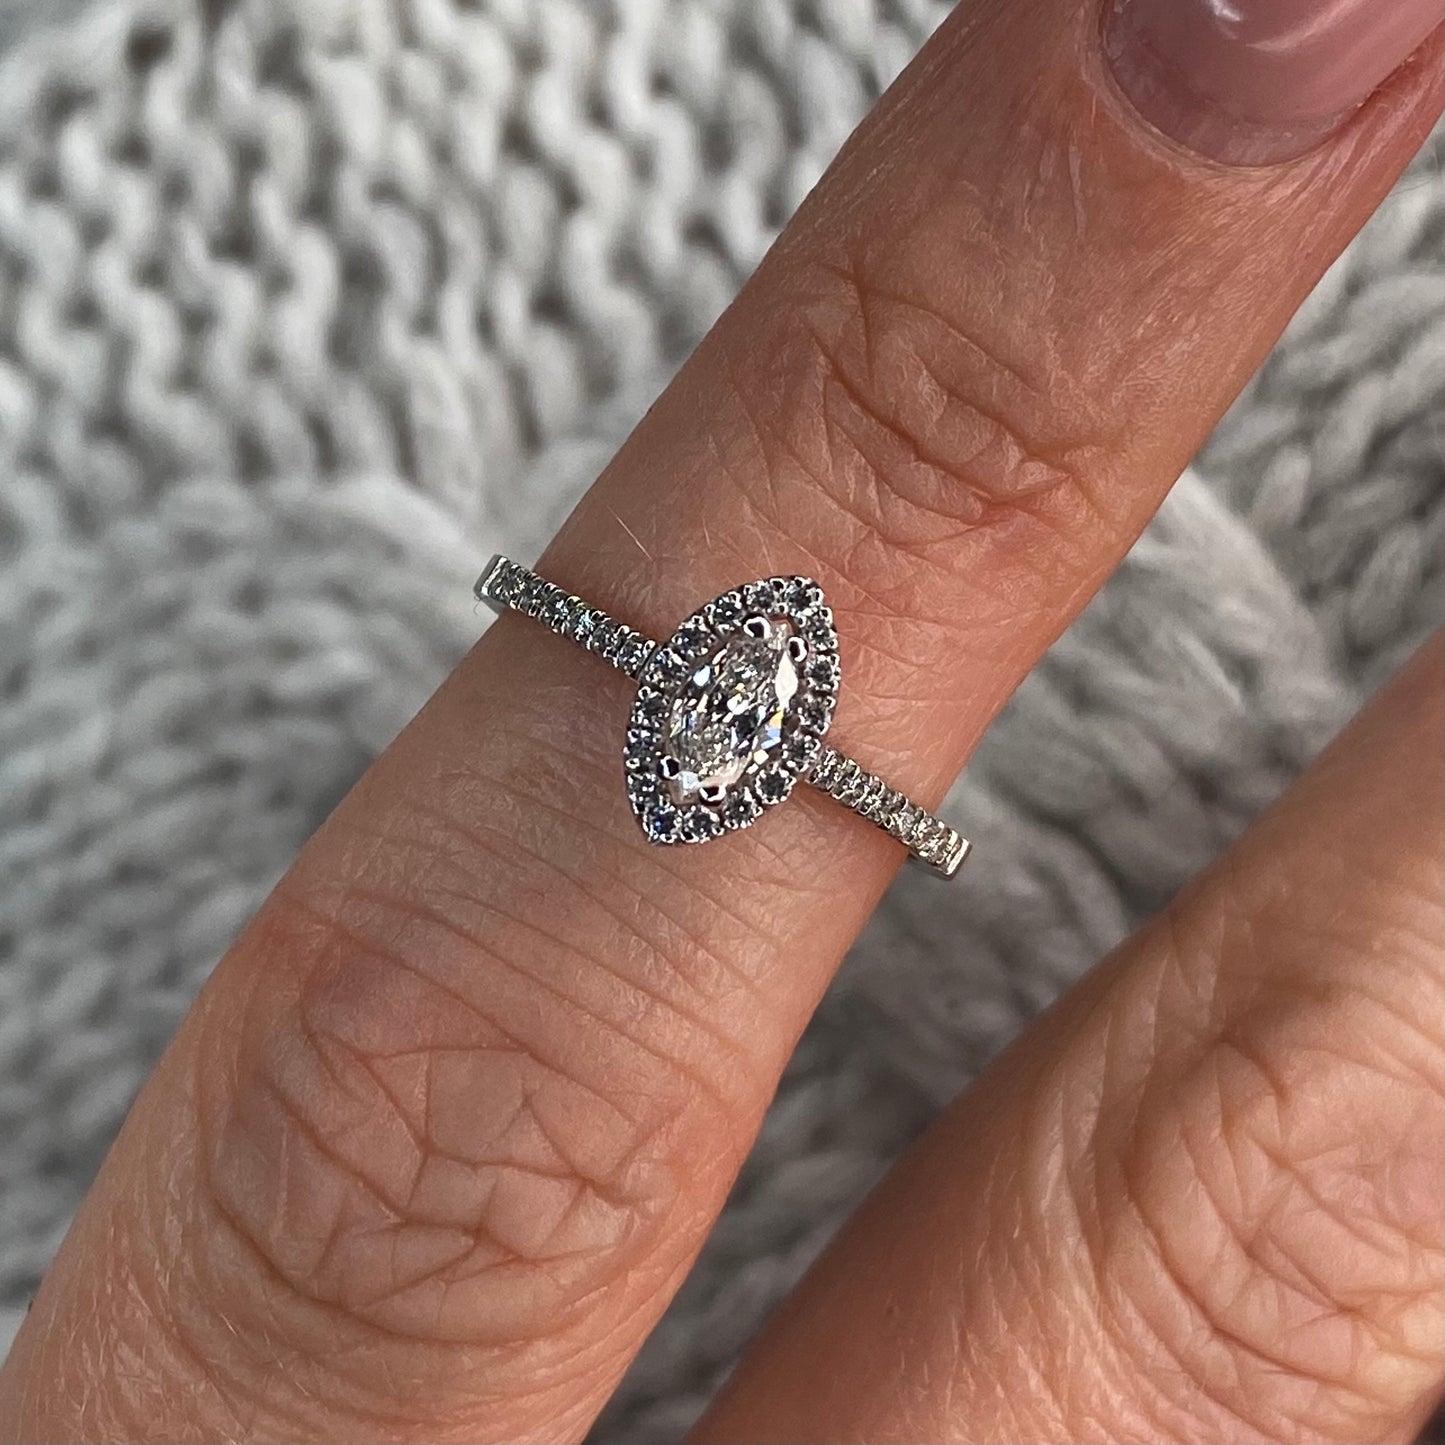 This Marquis halo diamond engagement ring  is a complete classic.  Its simplicity is so romantic.  The Details...  One 18ct white gold diamond engagement ring.  Diamond halo in a Marquis shape with diamond-set shoulders. 0.47ct in total of diamonds.  Colour GH. Clarity SI  Centre stone: 0.23ct  Melée: 0.24ct  18ct white gold.  Size L.  Made in Ireland 